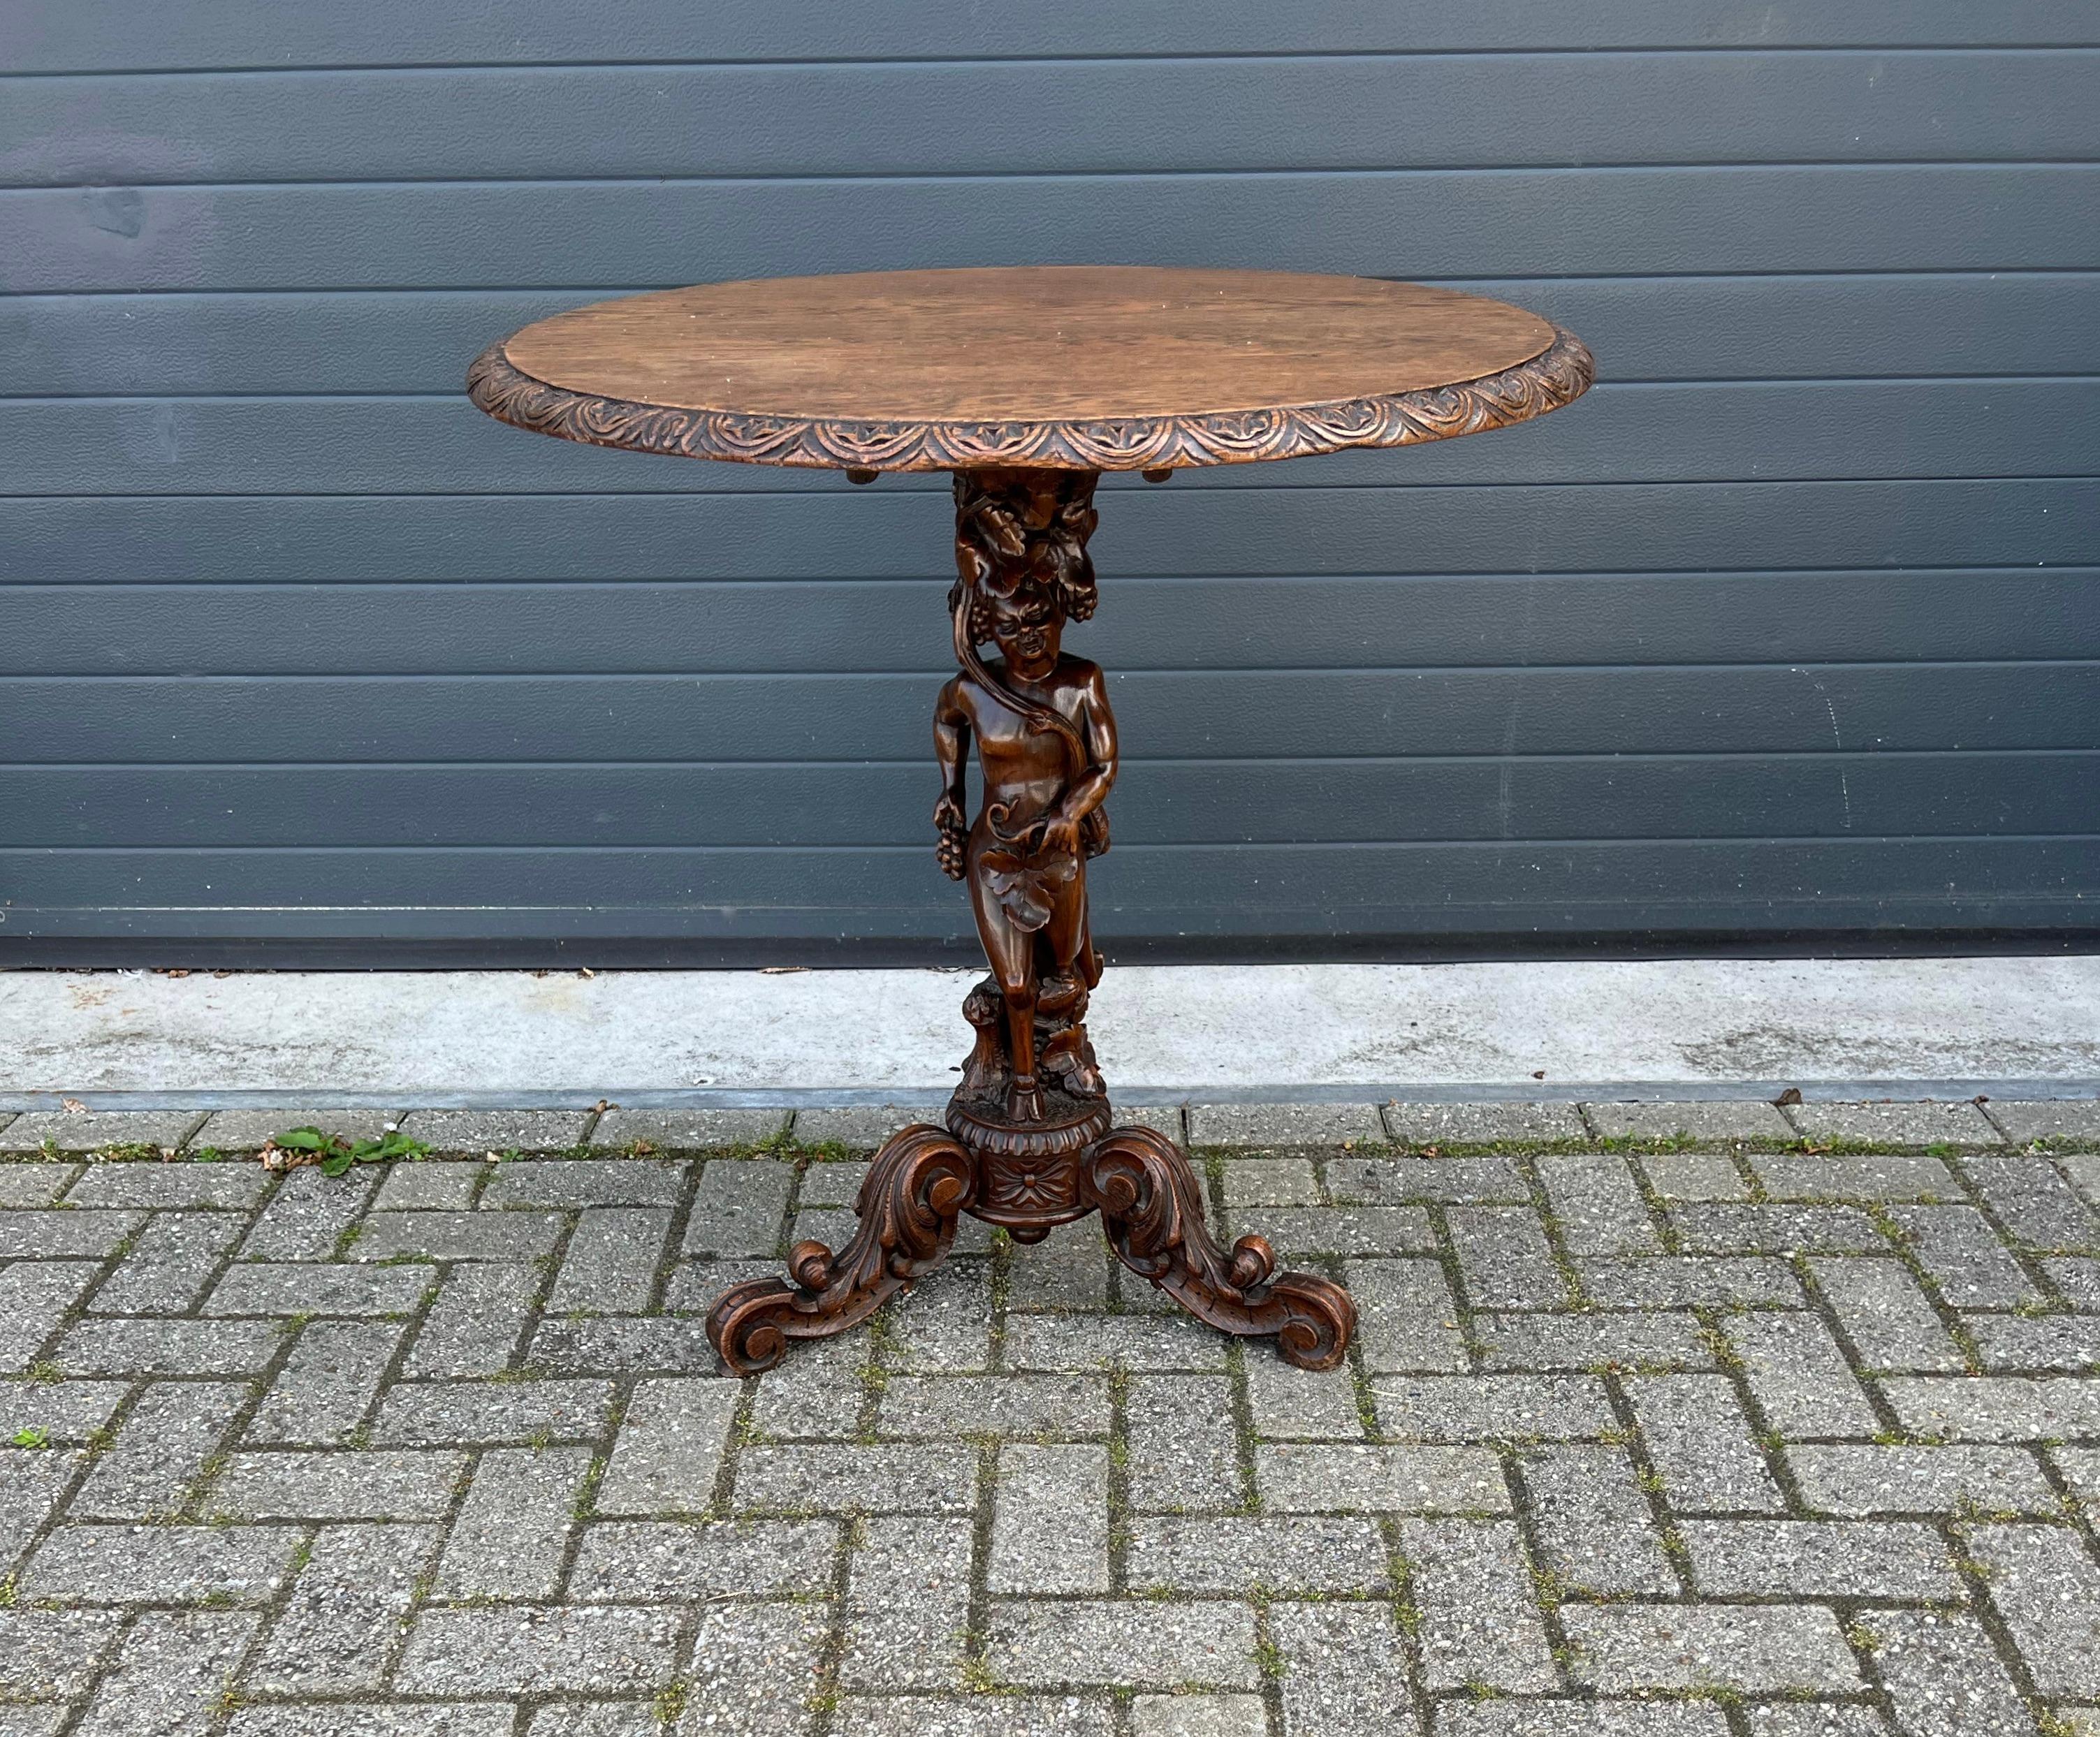 Remarkable, practical and highly decorative antique table.

We are certain that this incredibly well-crafted and one of a kind table will appeal to both antique furniture enthousiasts in general AND to wine related antique collectors in